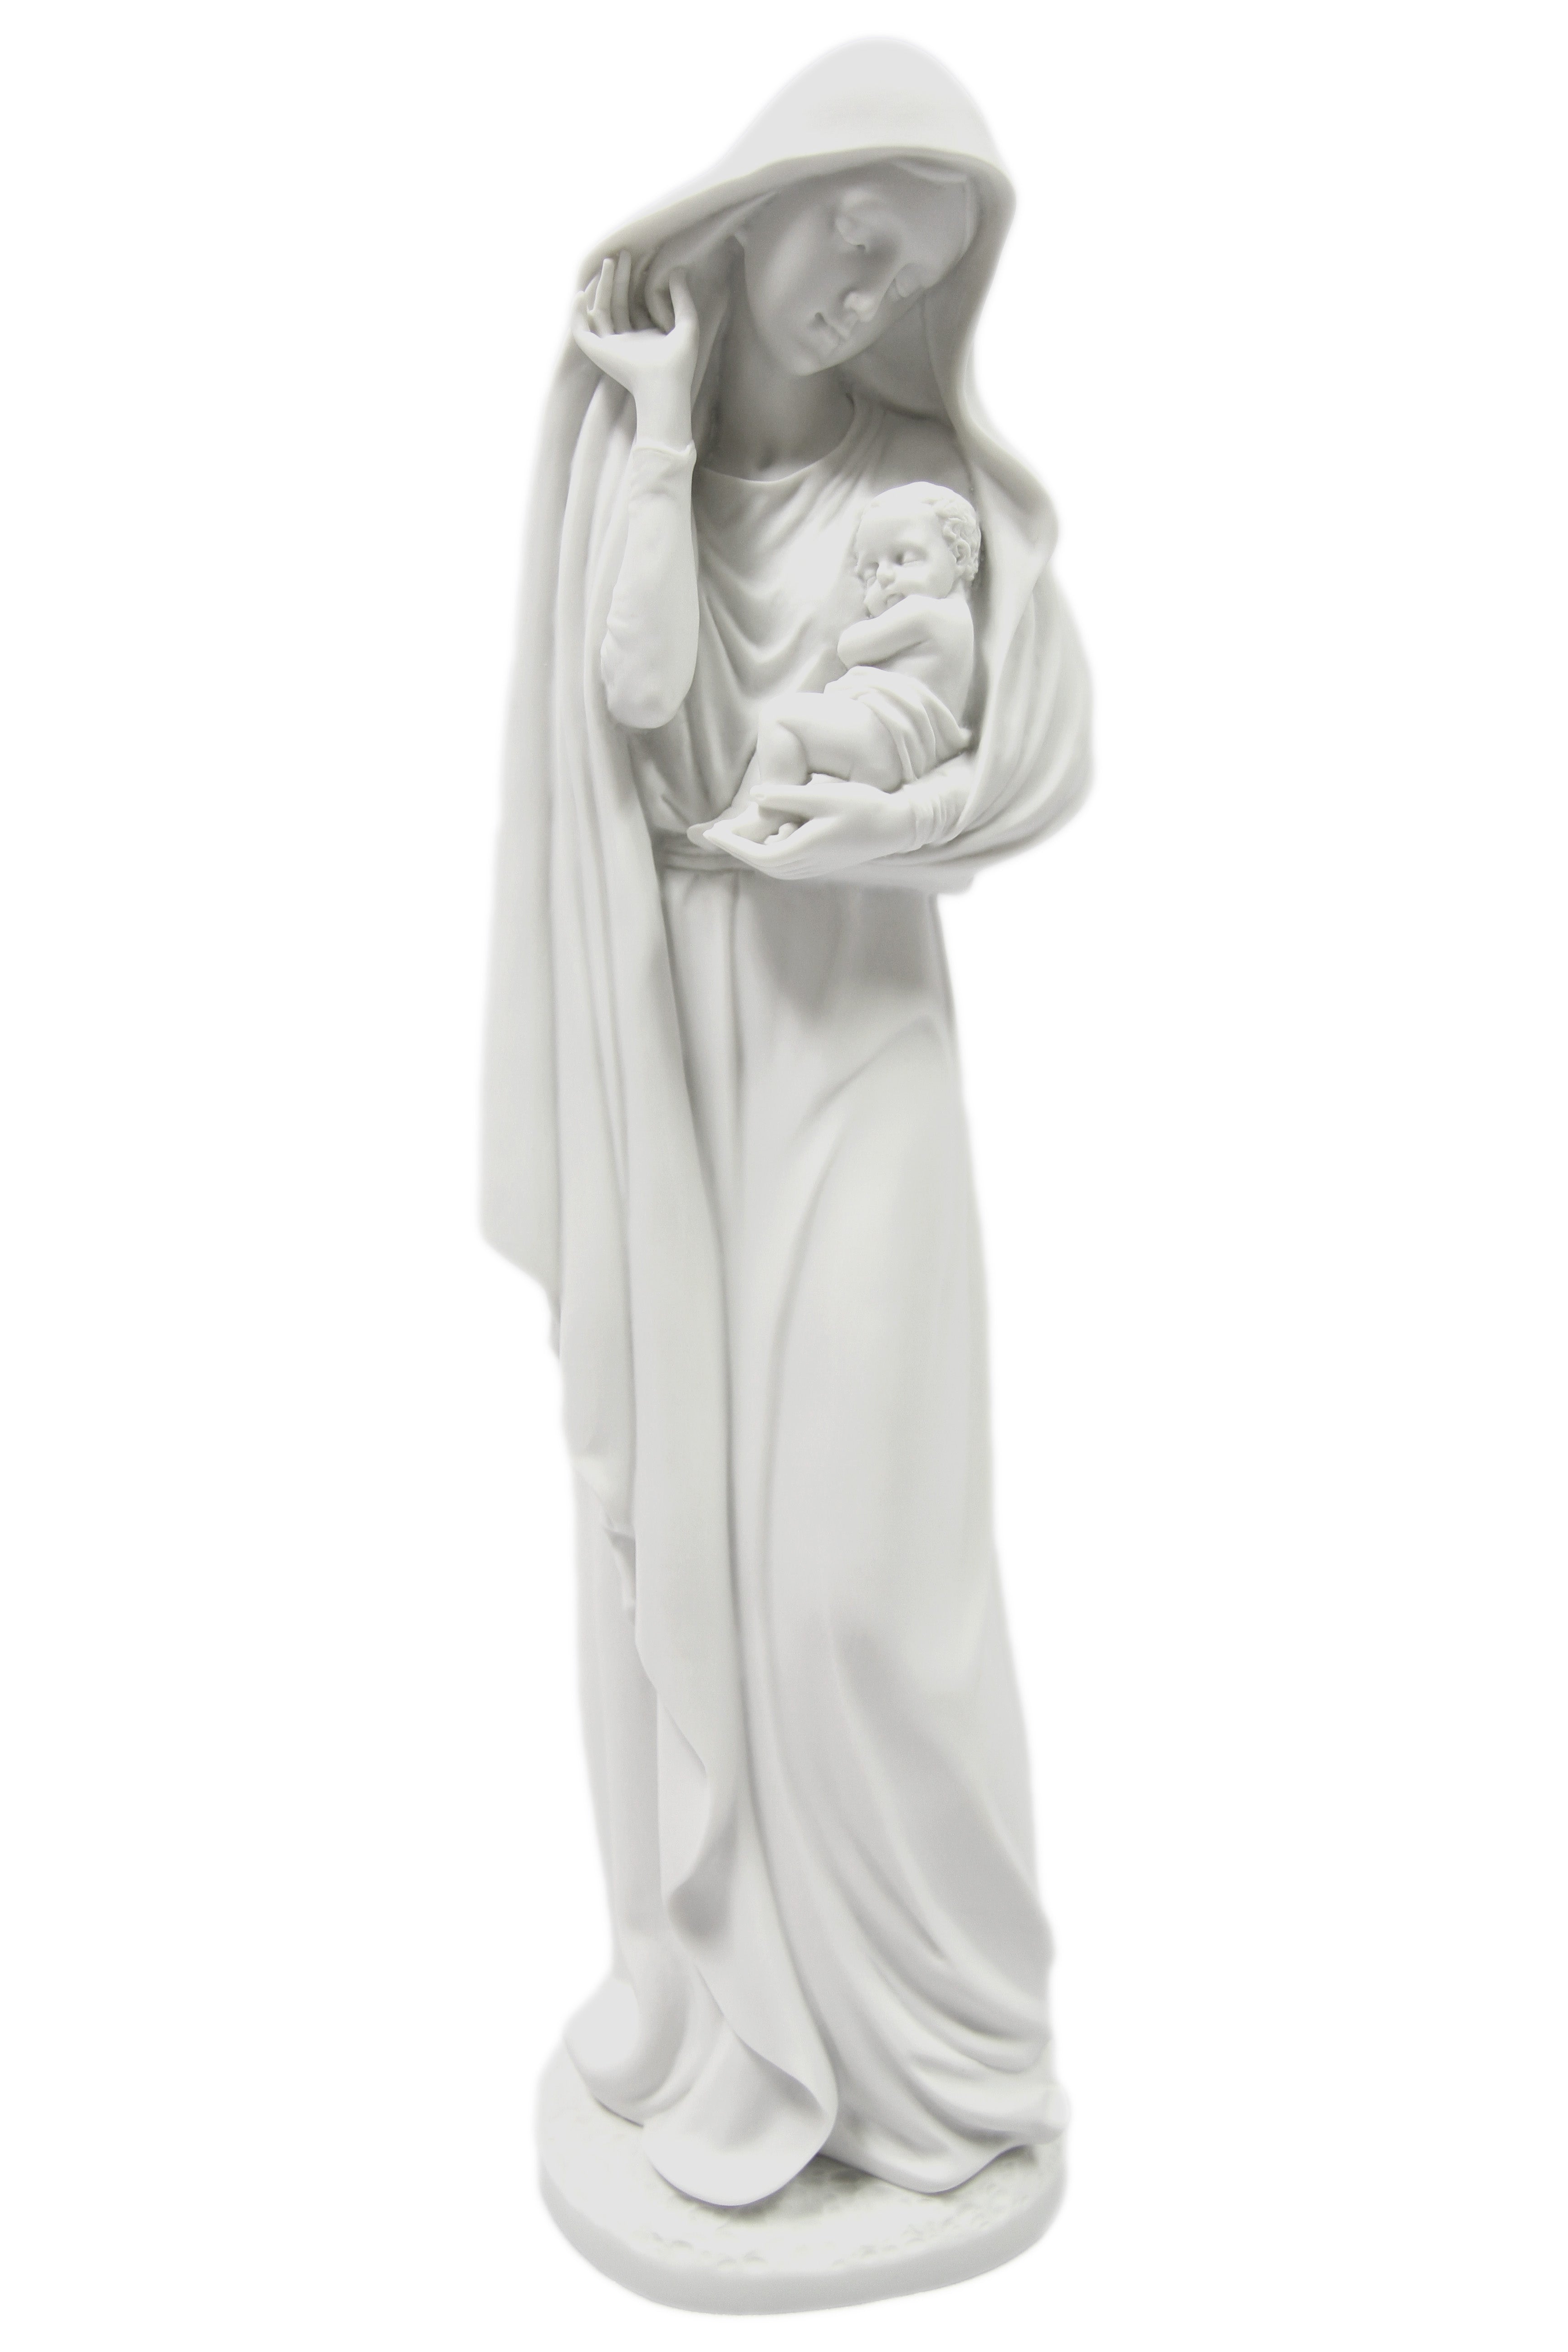 18" Virgin Mary with Holy Child Catholic Statue Vittoria Collection Made in Italy